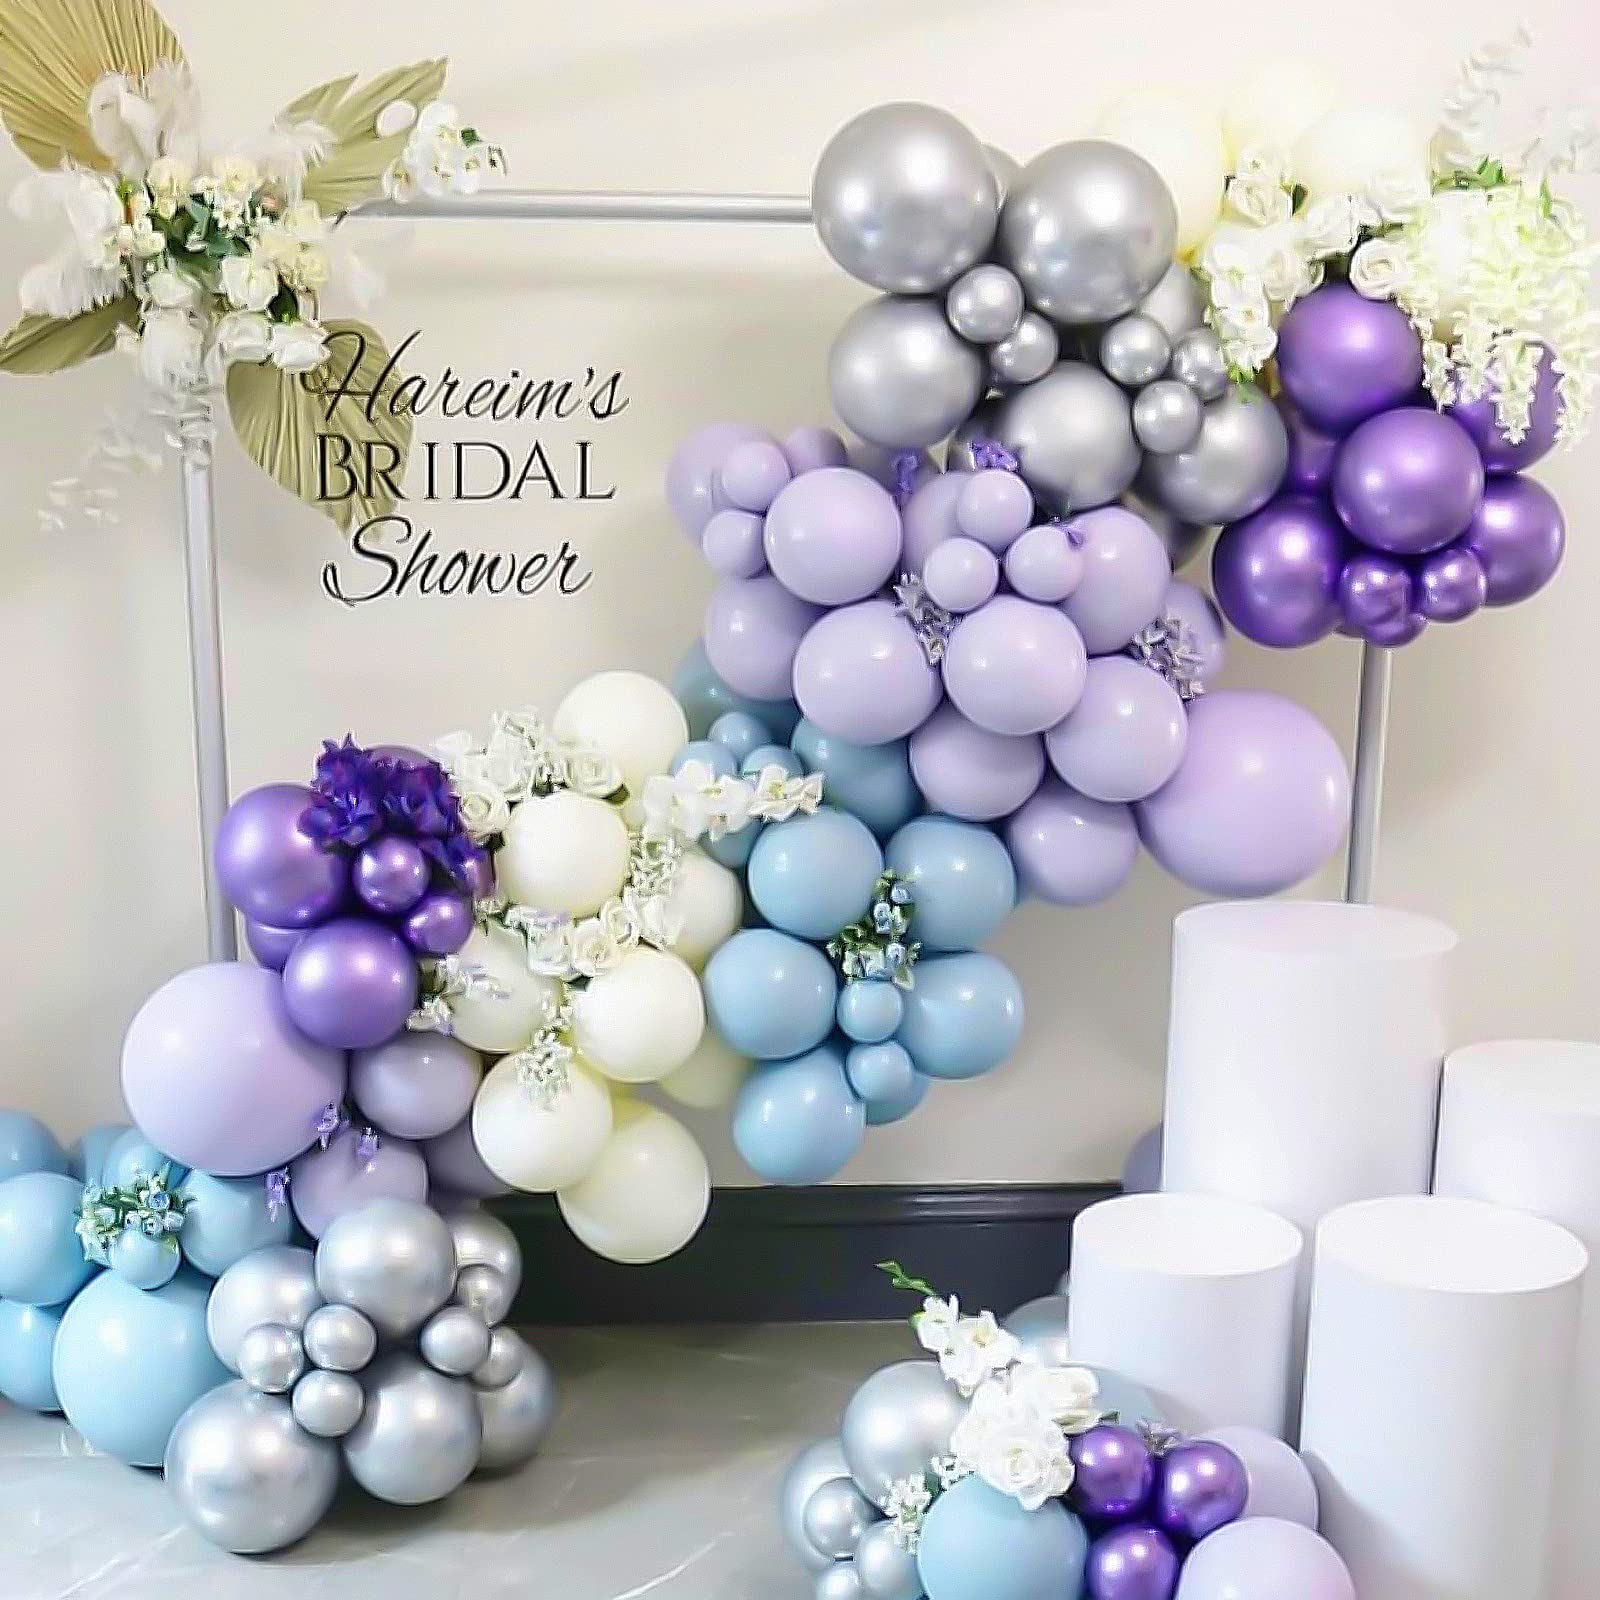 RUBFAC Pastel Purple and Pastel Orange Balloons Different Sizes 105pcs 5/10/12/18 Inches for Garland Arch, Latex Balloons for Birthday Baby Shower Wedding Lilac Lavender Balloons Party Decorations